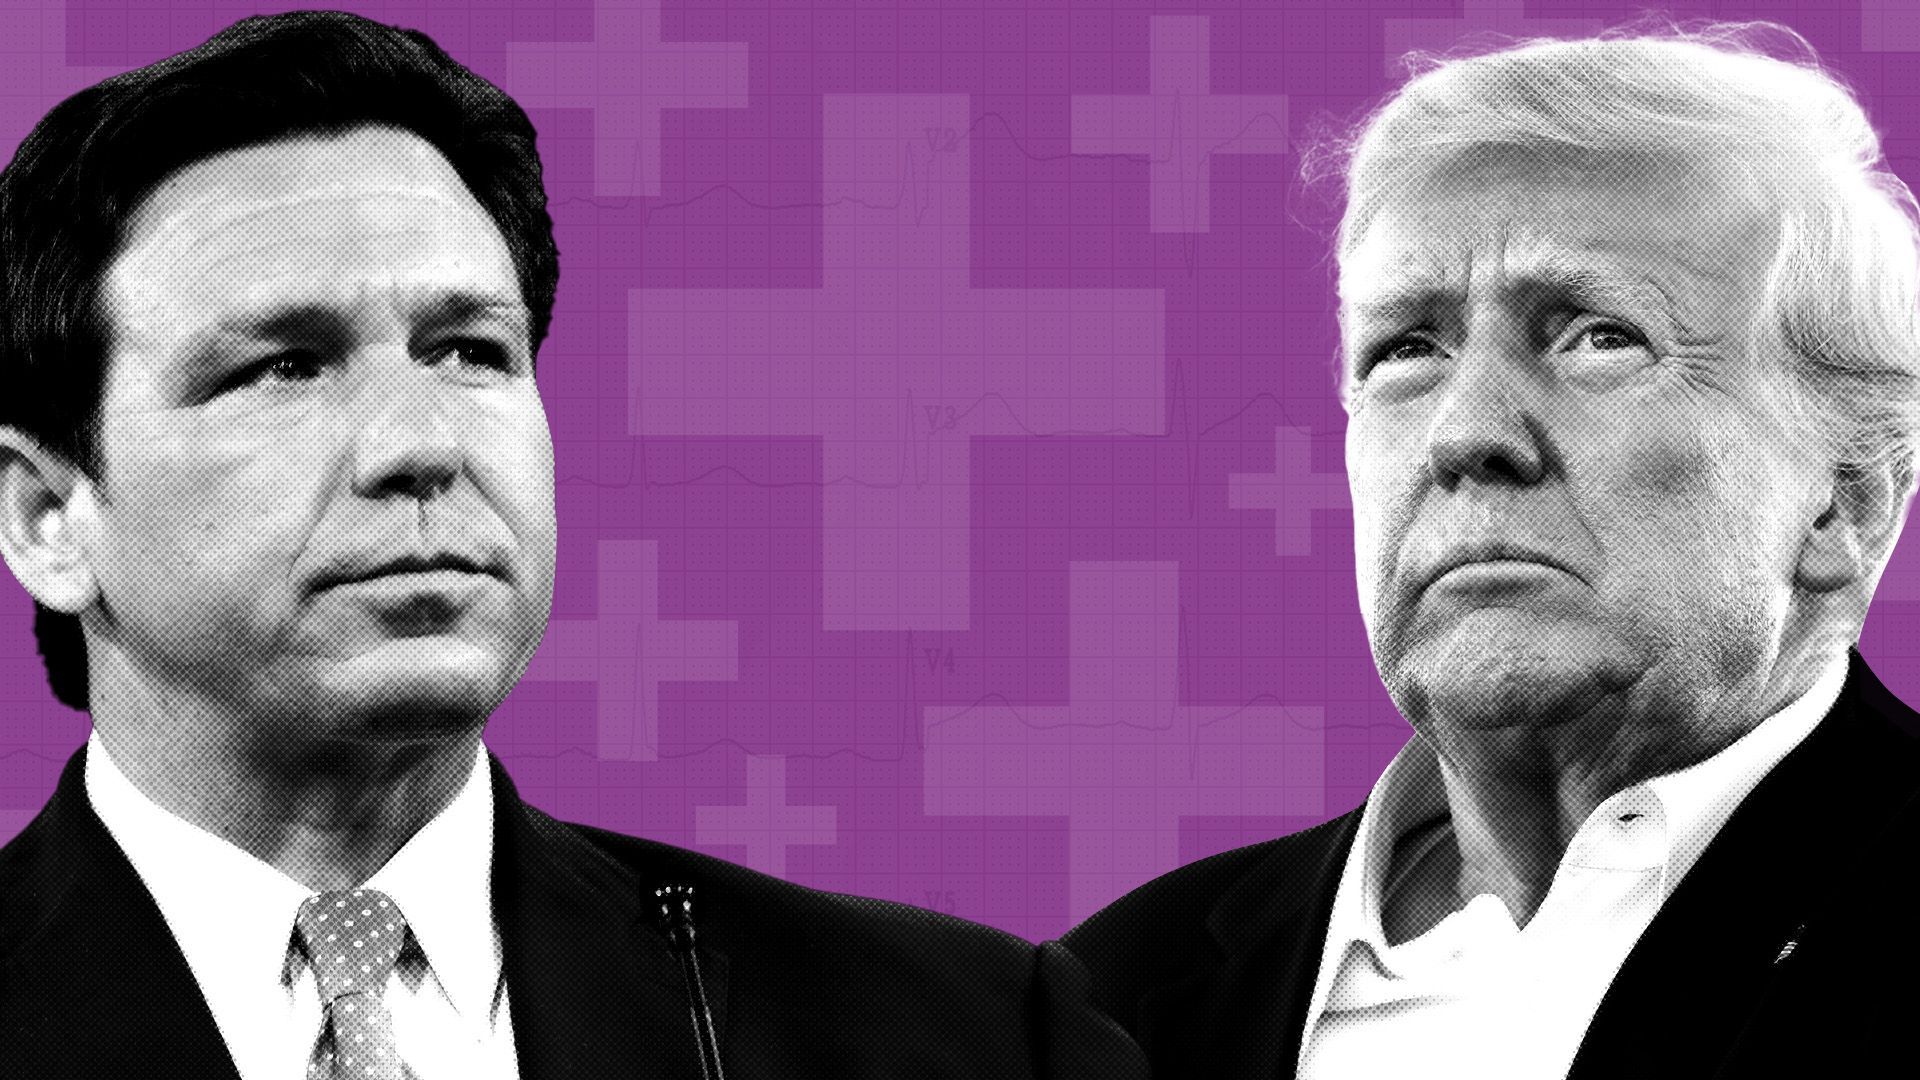 photos of ron desantis and president donald trump on a background made up of health pluses and ekg graph paper 